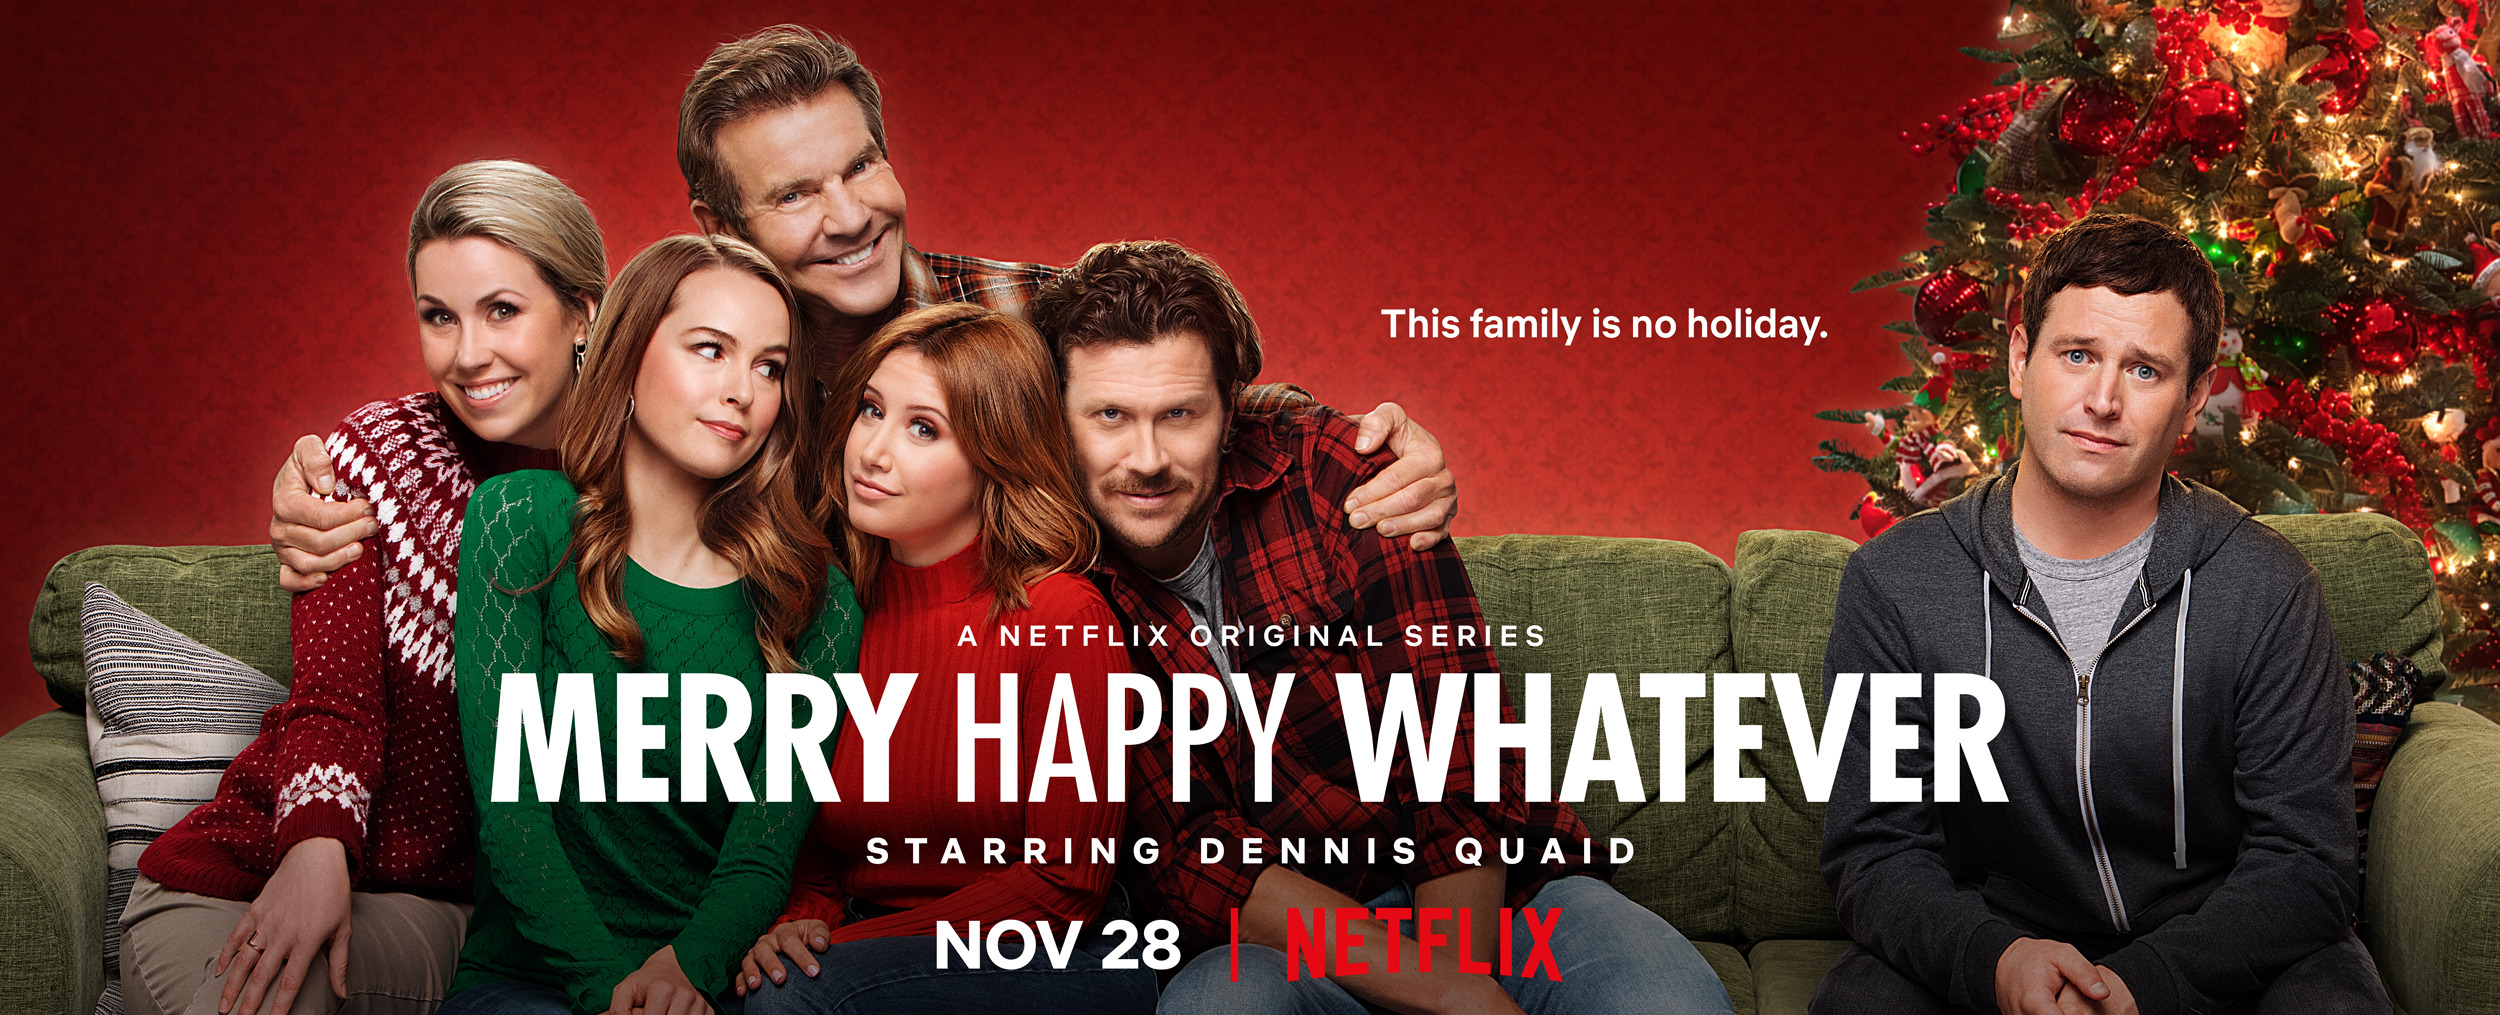 Mega Sized TV Poster Image for Merry Happy Whatever 